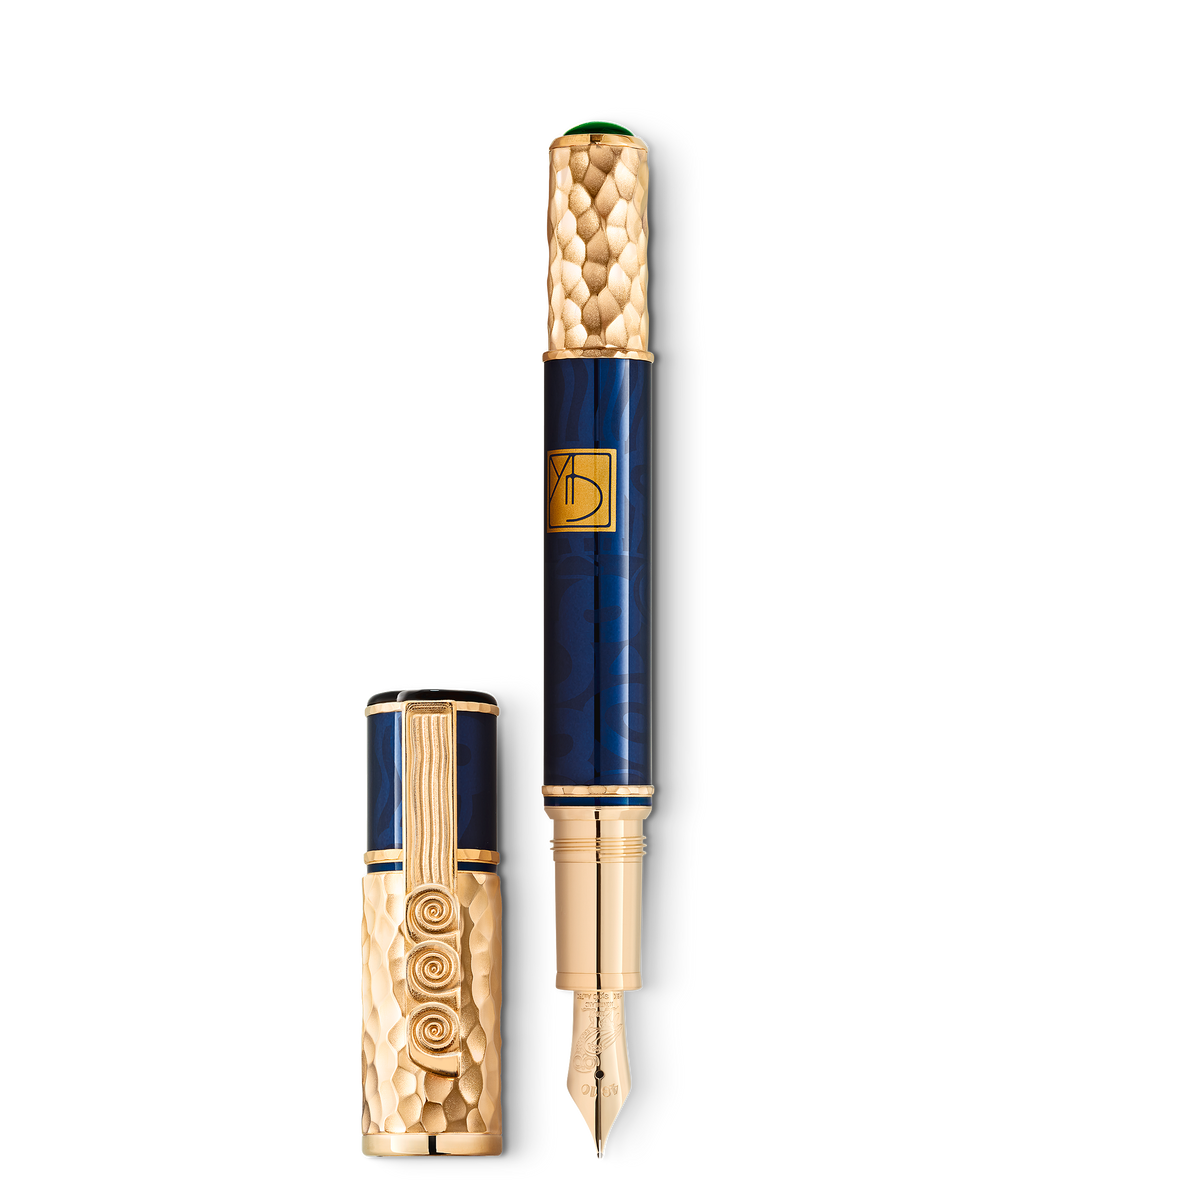 Masters of Art Homage to Gustav Klimt Limited Edition 4810 Fountain Pen